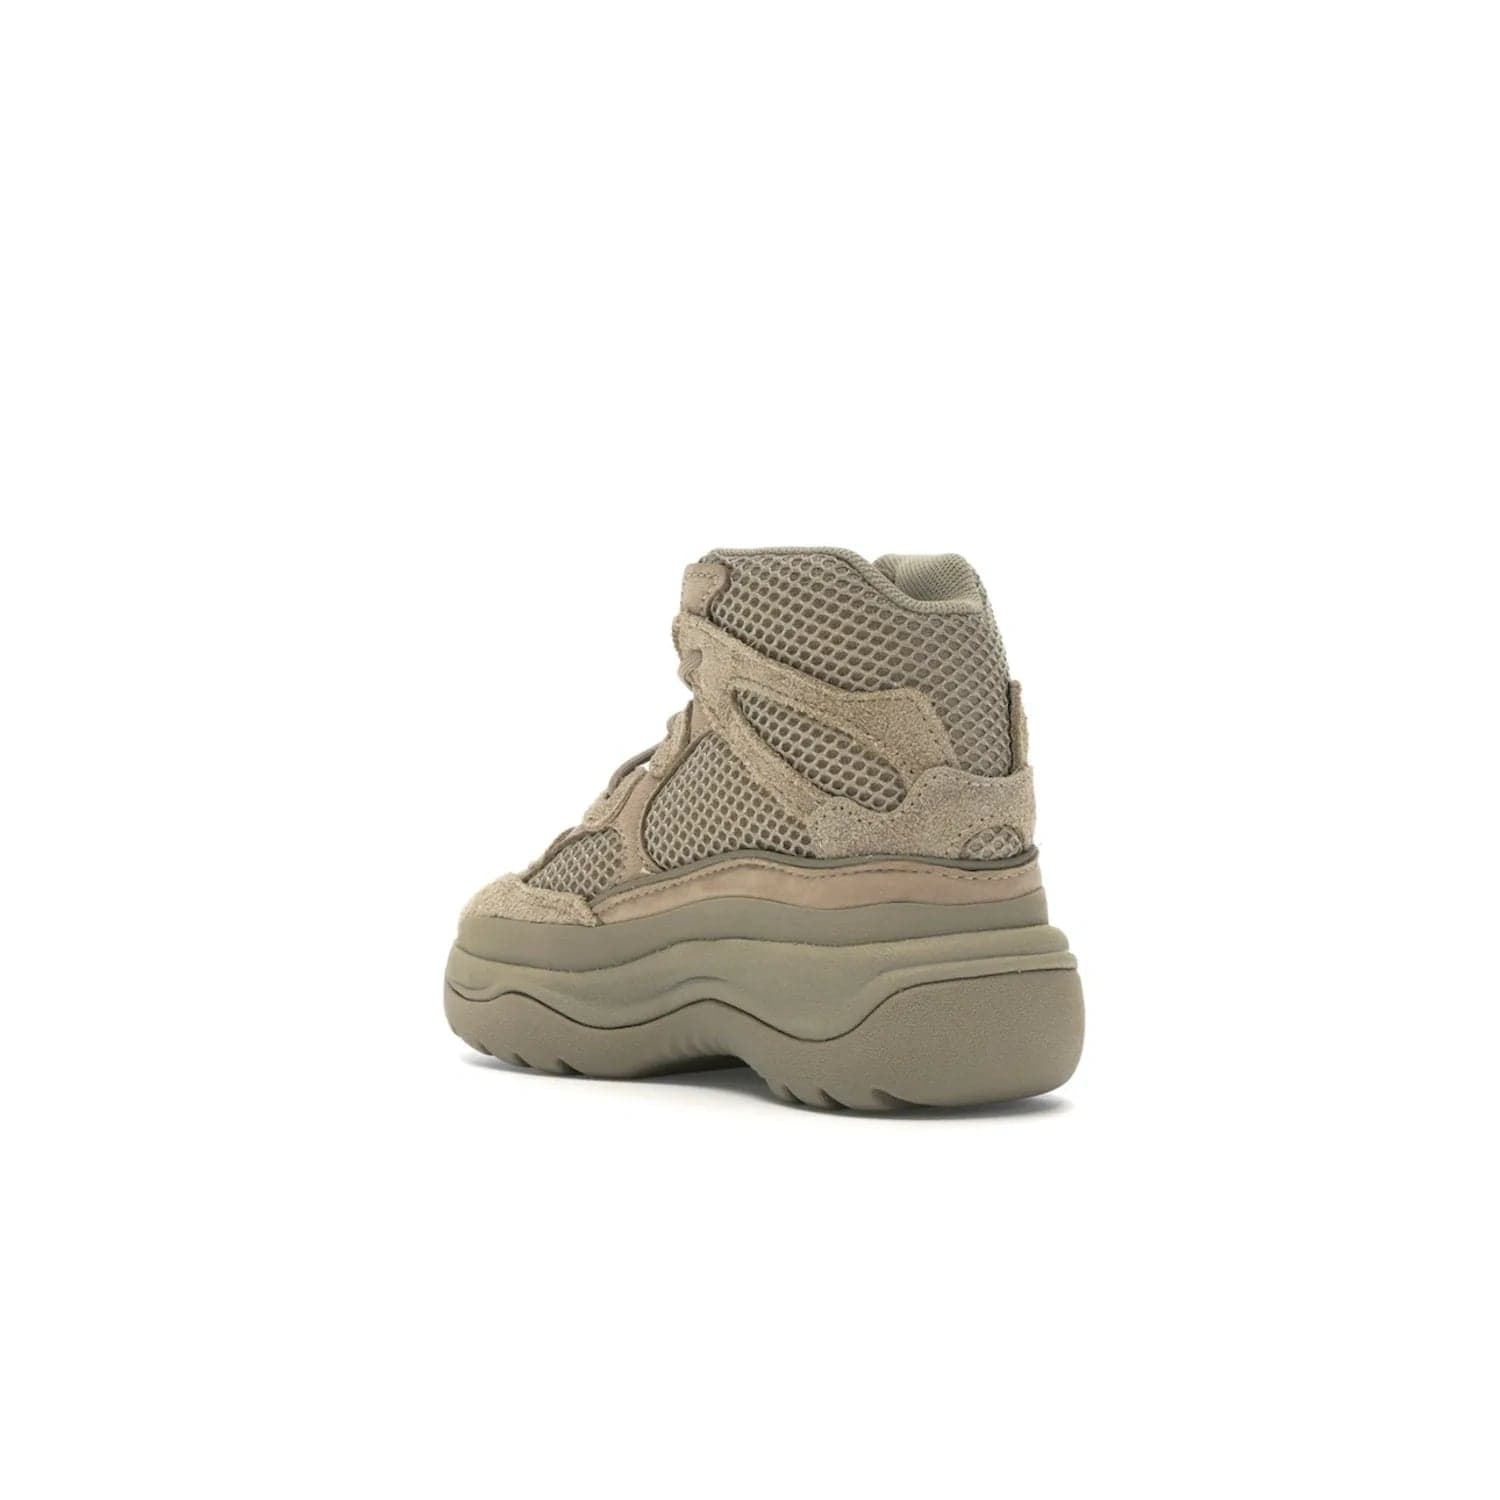 adidas Yeezy Desert Boot Rock (Kids) - Image 24 - Only at www.BallersClubKickz.com - Elevate your style this season with the adidas Yeezy Desert Boot Rock. Crafted from layered nylon and suede, this chic kids' silhouette features an EVA midsole and rubber outsole for superior cushioning and traction.